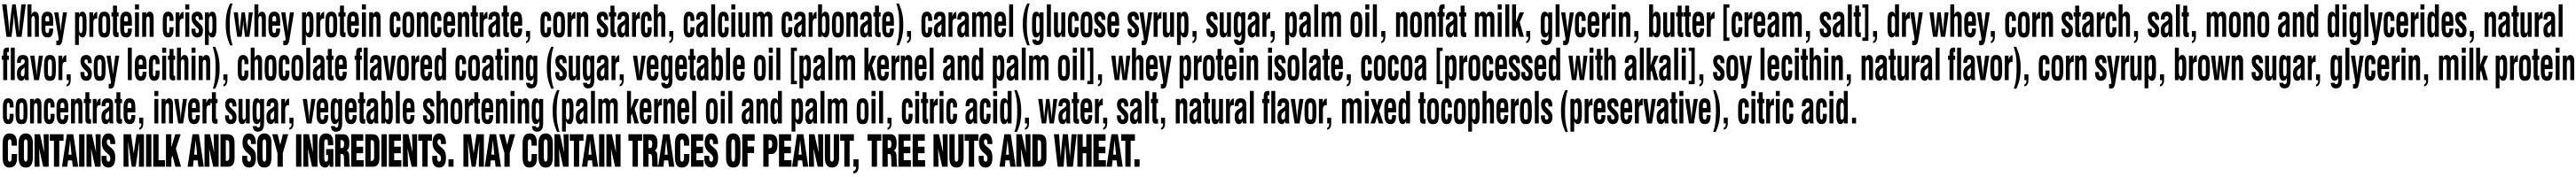 Image describing nutrition information for product Gatorade Recover Whey Protein Bar Chocolate Caramel